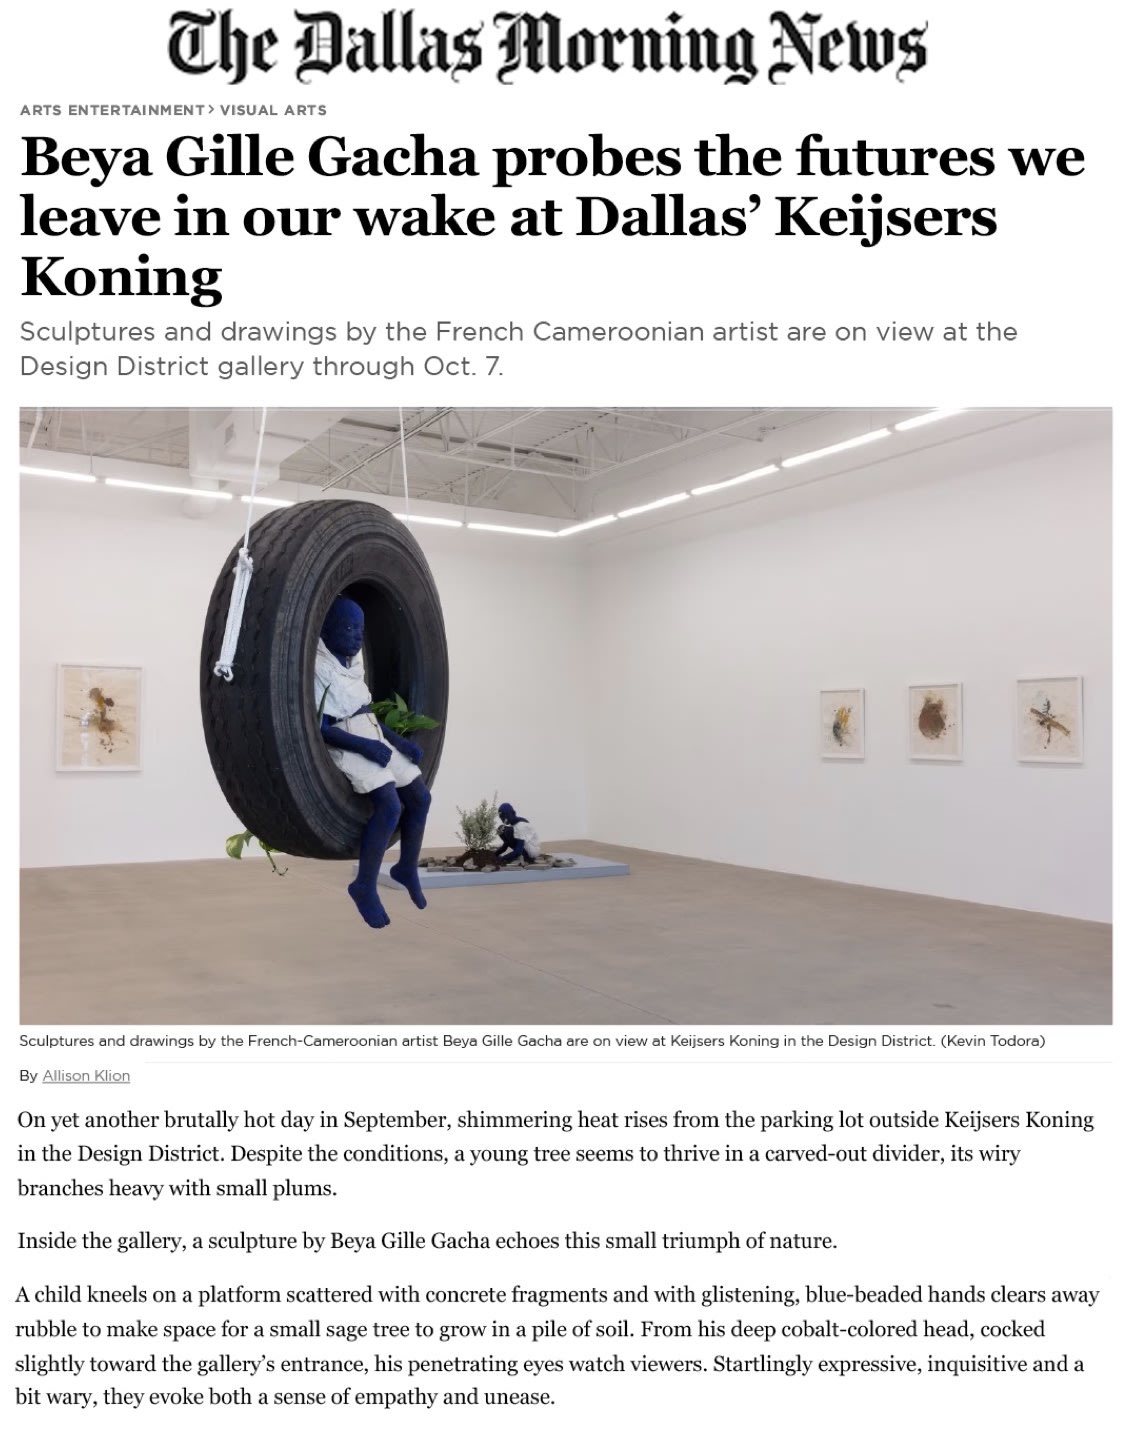 page featuring the article in the Dallas Morning News